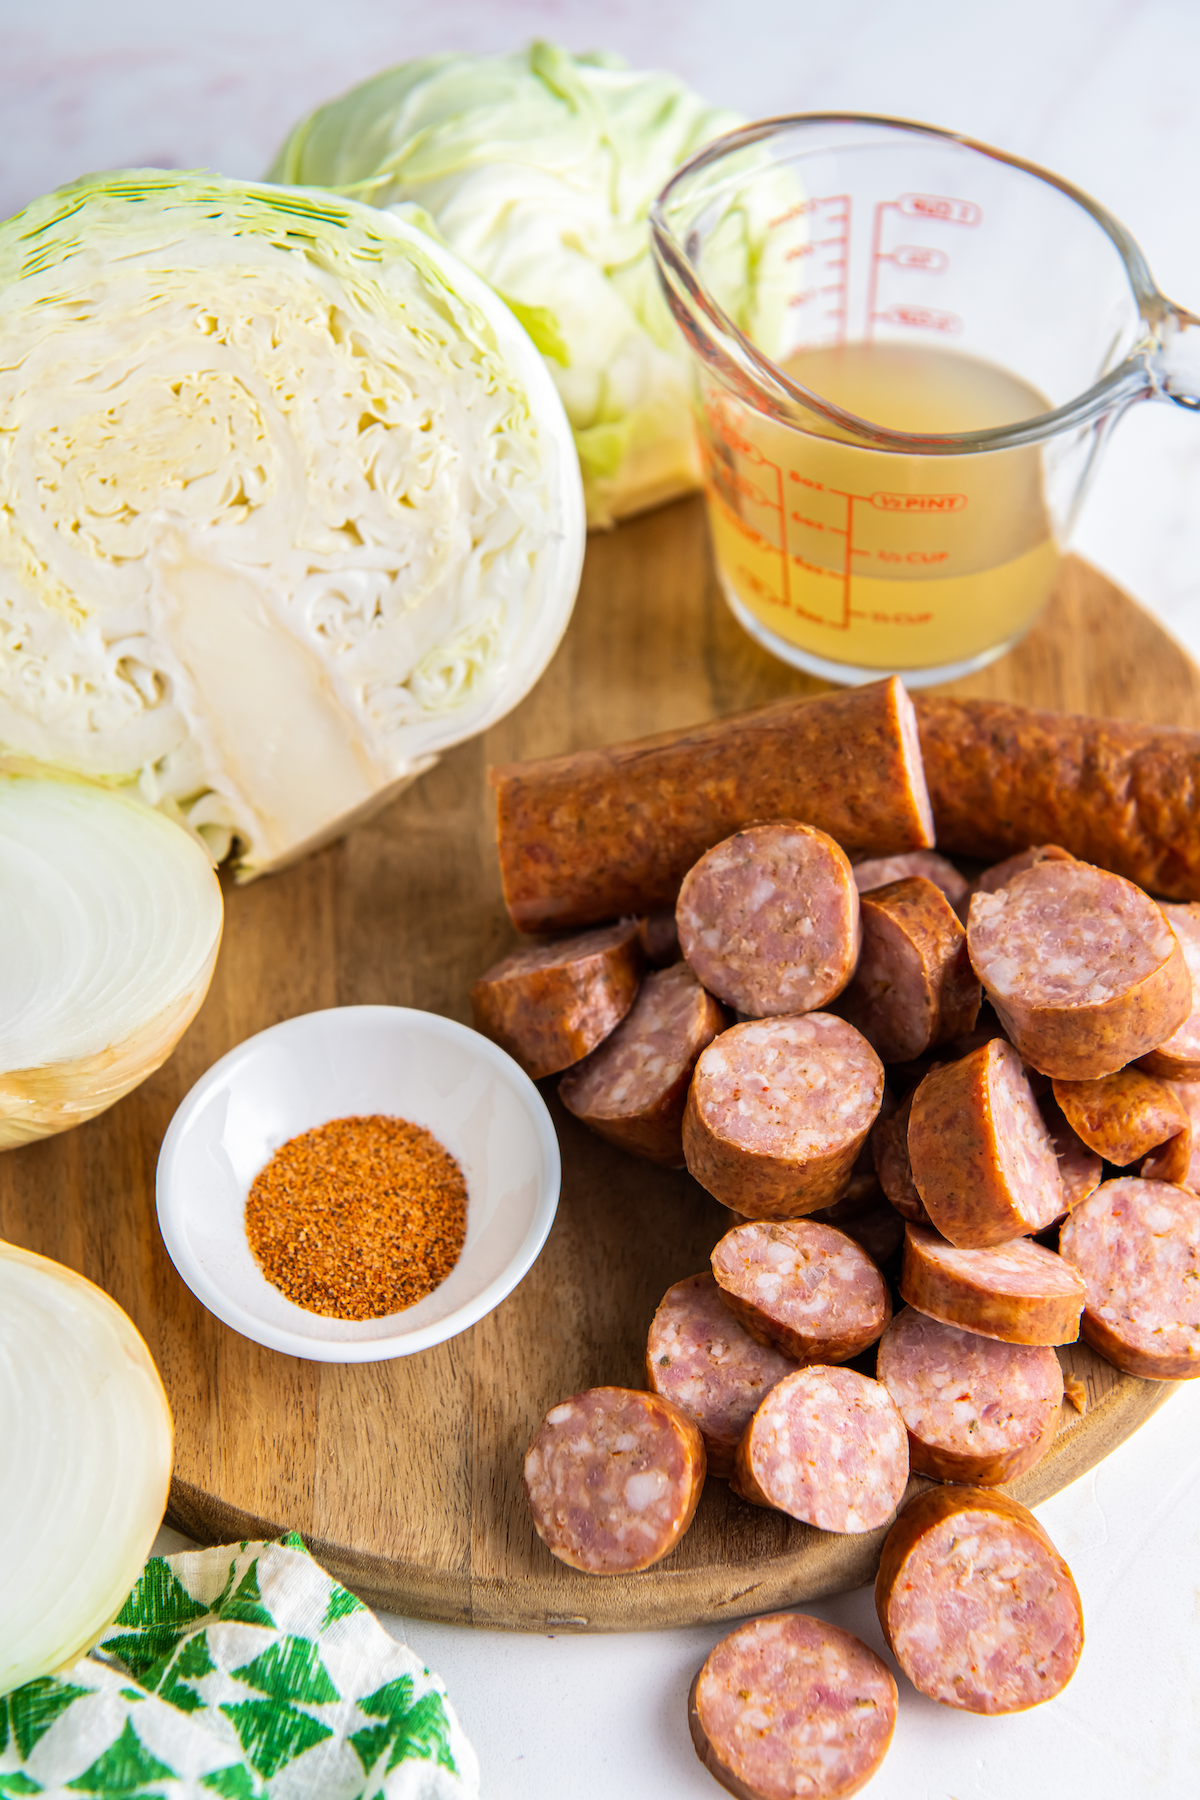 Ingredients for cabbage and sausage.